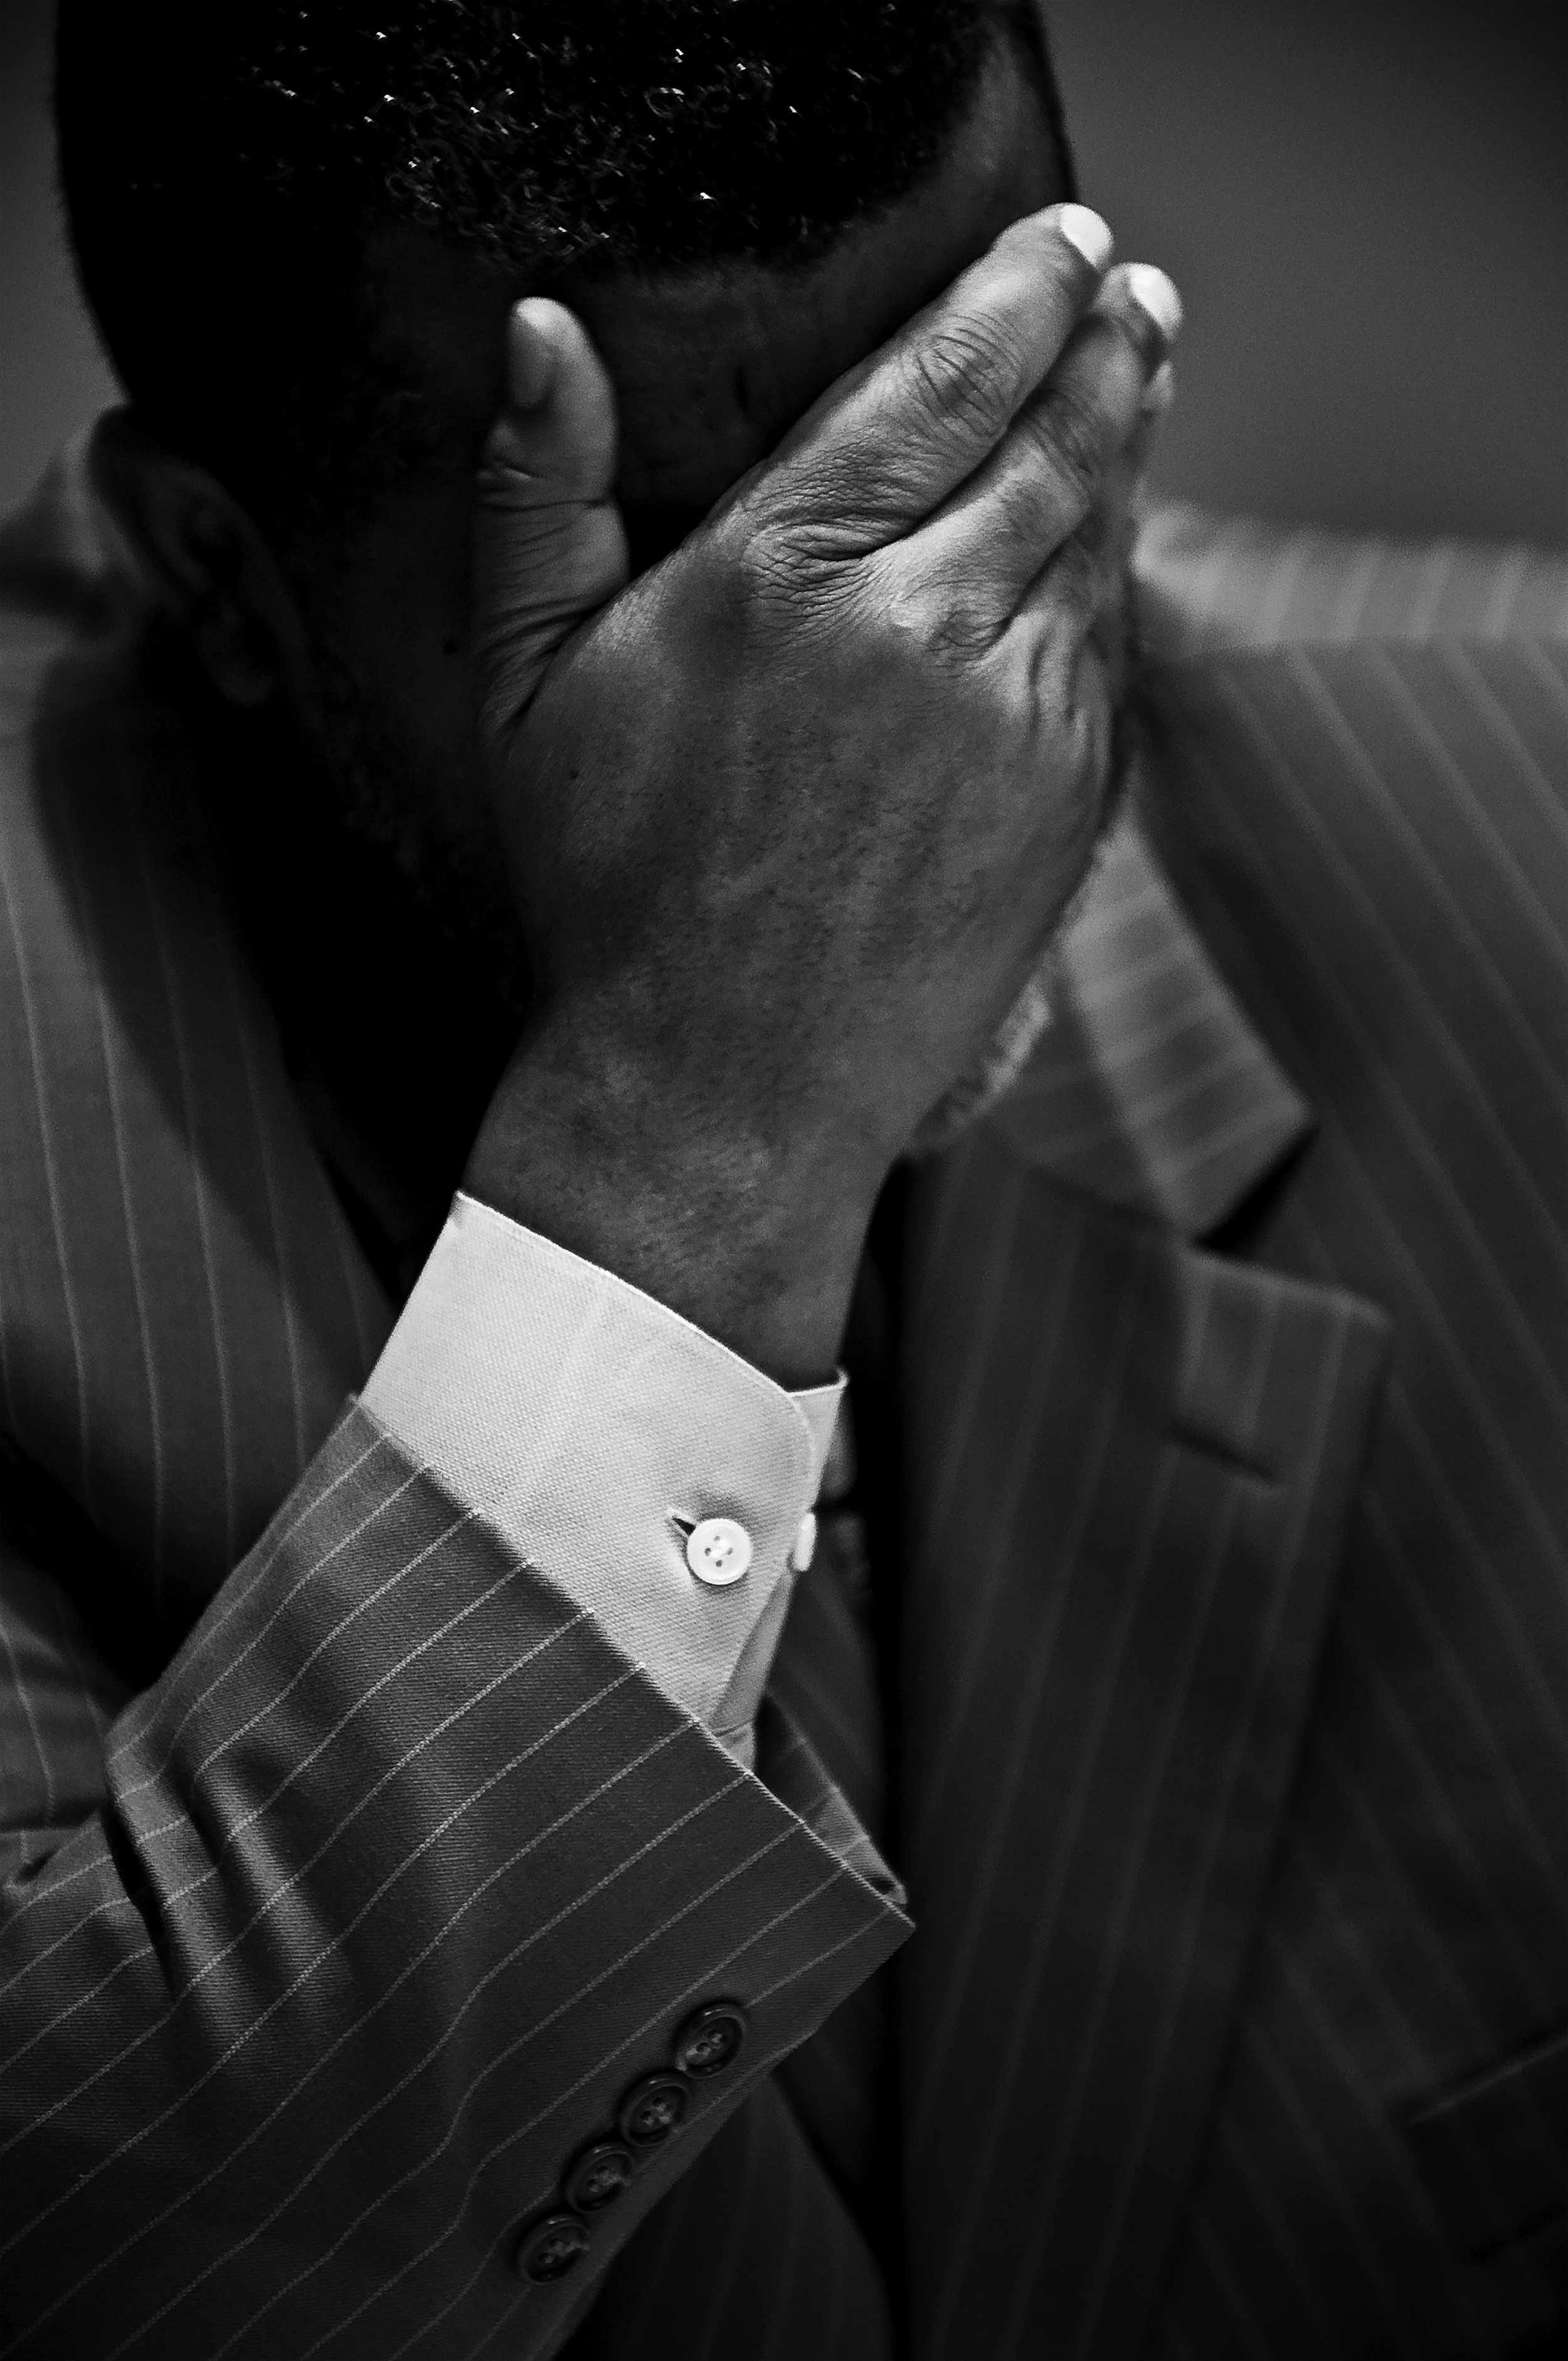  Former Dallas City Council member and Mayor Pro Tem Don Hill covers his face during an exclusive post-trial interview in Dallas, TX.  In 2009, Hill was sentenced to 18 years in federal prison for bribery, having been found guilty of coercing develop